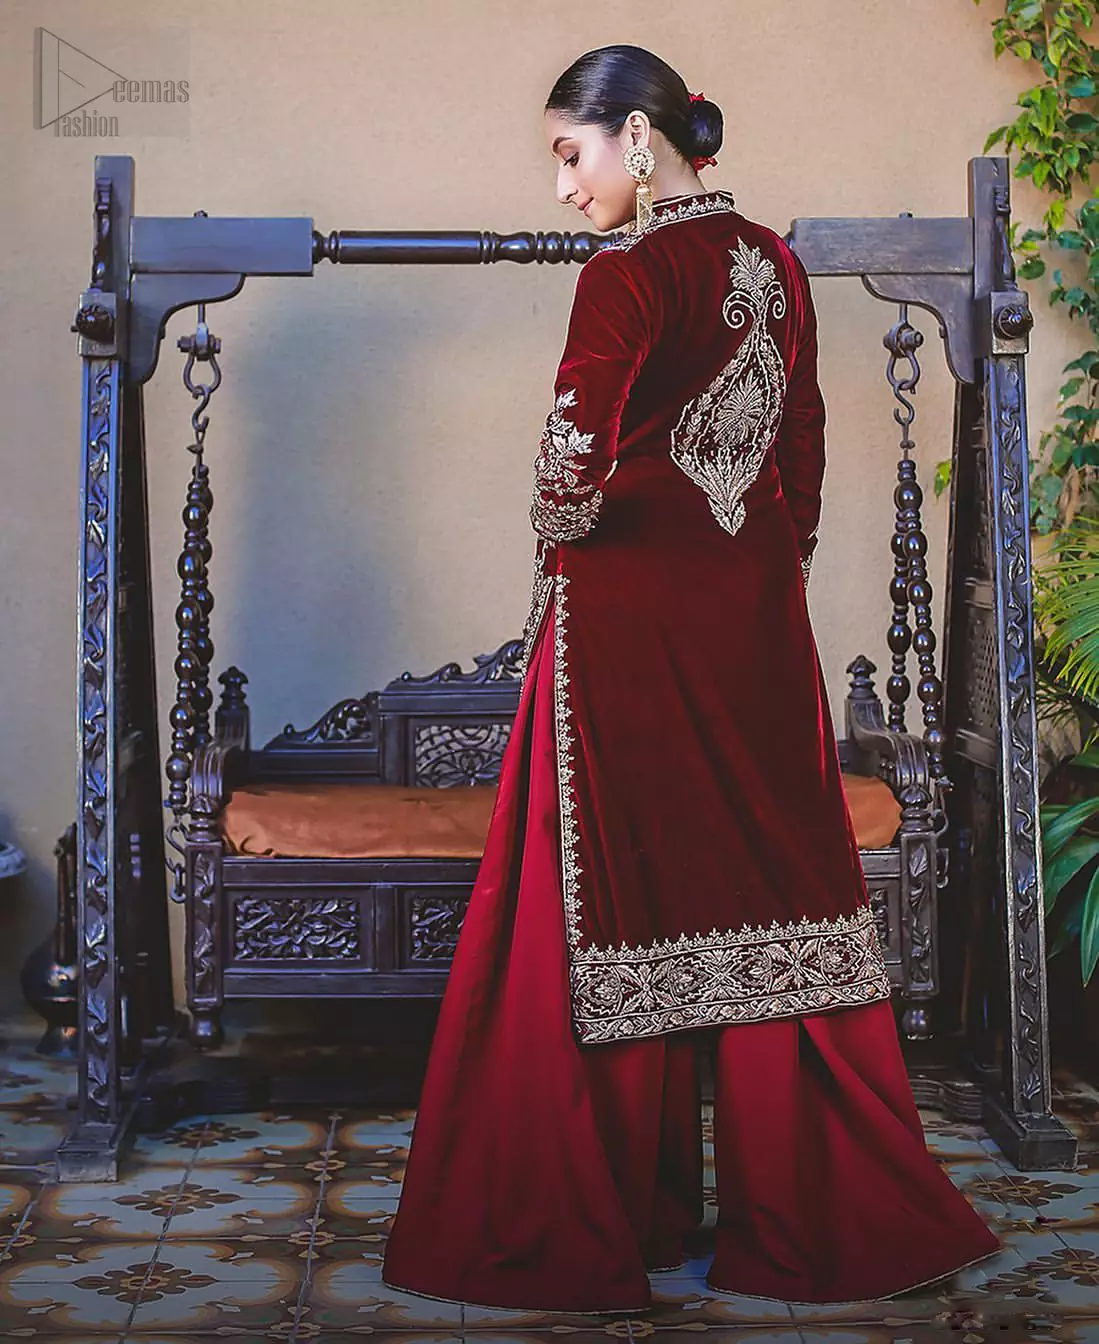 Steal the show with this endearing velvet outfit with intricate yet rich embroidery. The chic yet elegant front open shirt is decorated with embroidered patterns, embellished collar neckline and floral bunches. Hemline is even more enhanced with detailed zardozi work. The back of the shirt has a central large motif on the bodice while the zardozi work creates drama on both front and back panels. Beautifully paired up with maroon palazzo pants. Finish the look with maroon organza dupatta adorned with tiny floral motifs all over.